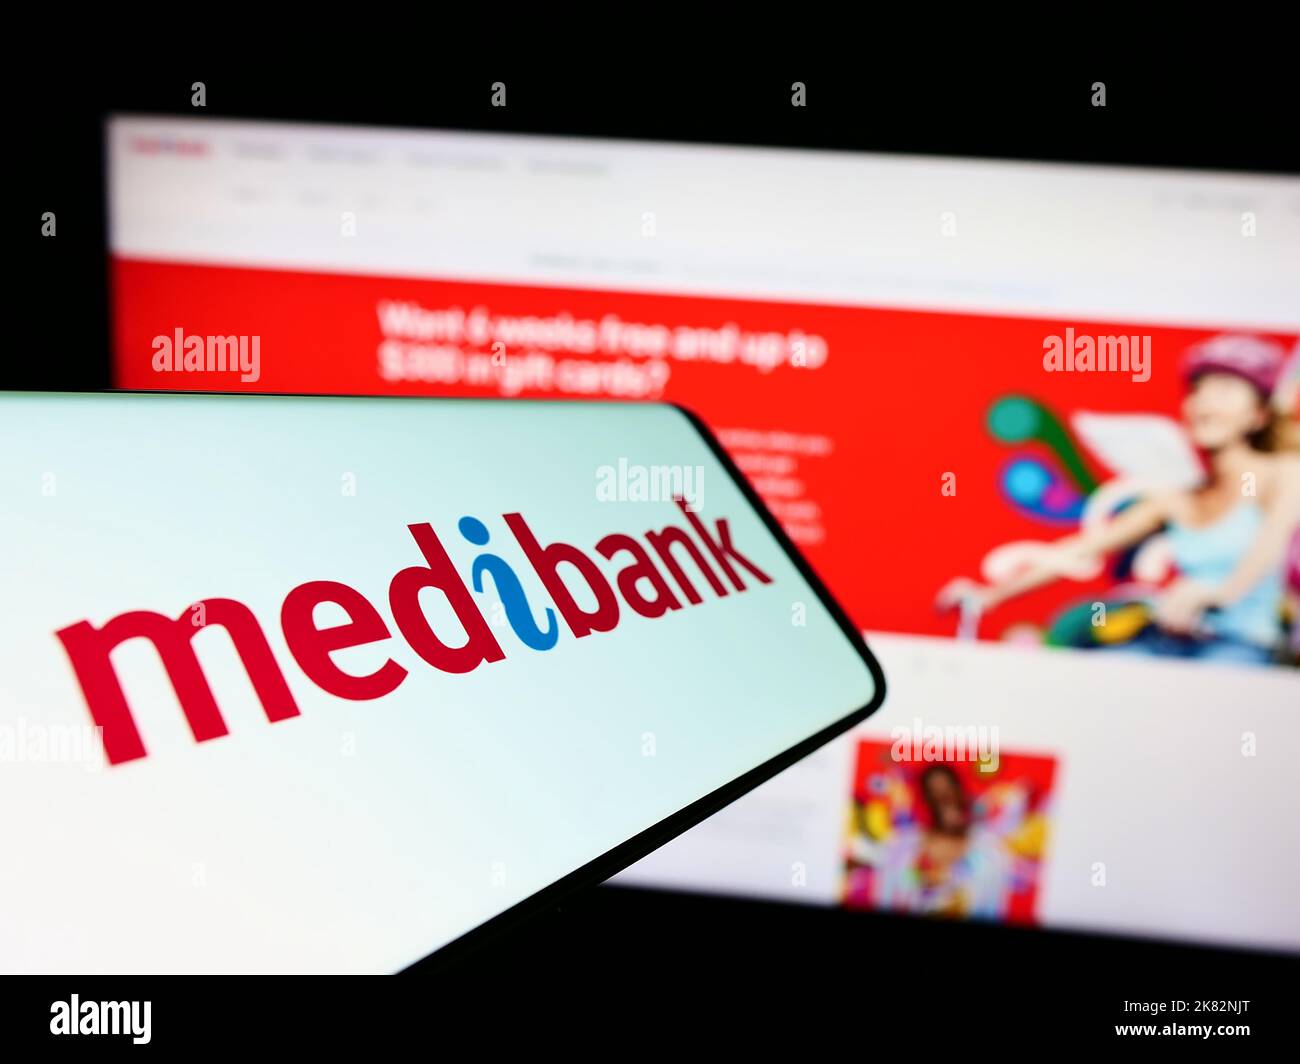 Smartphone with logo of health insurance company Medibank Private Limited on screen in front of website. Focus on center-left of phone display. Stock Photo